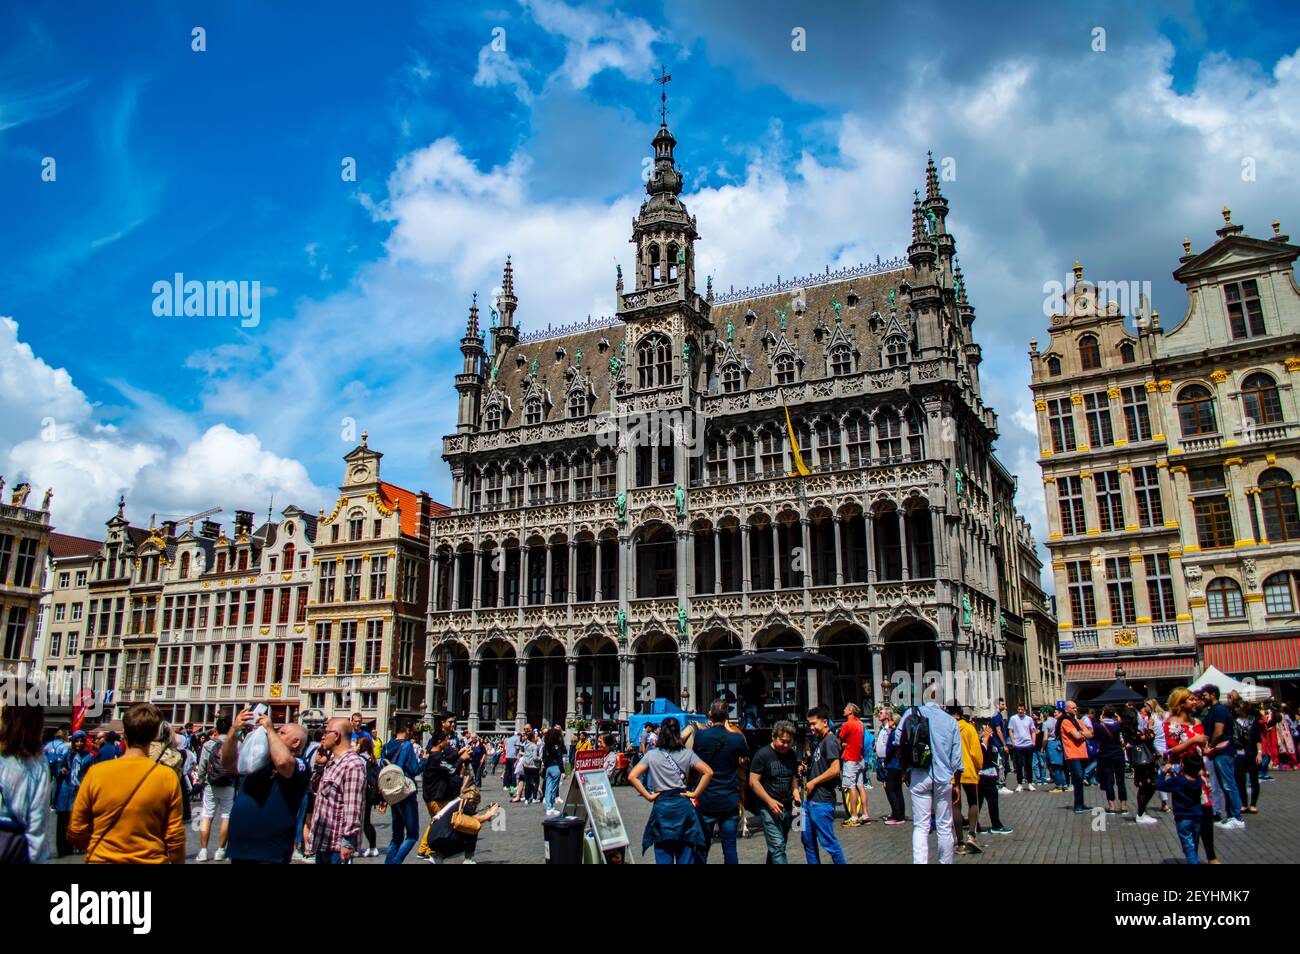 Brussels, Belgium - July 13, 2019: Crowd of people on Grand Place, the central square of Brussels, Belgium Stock Photo